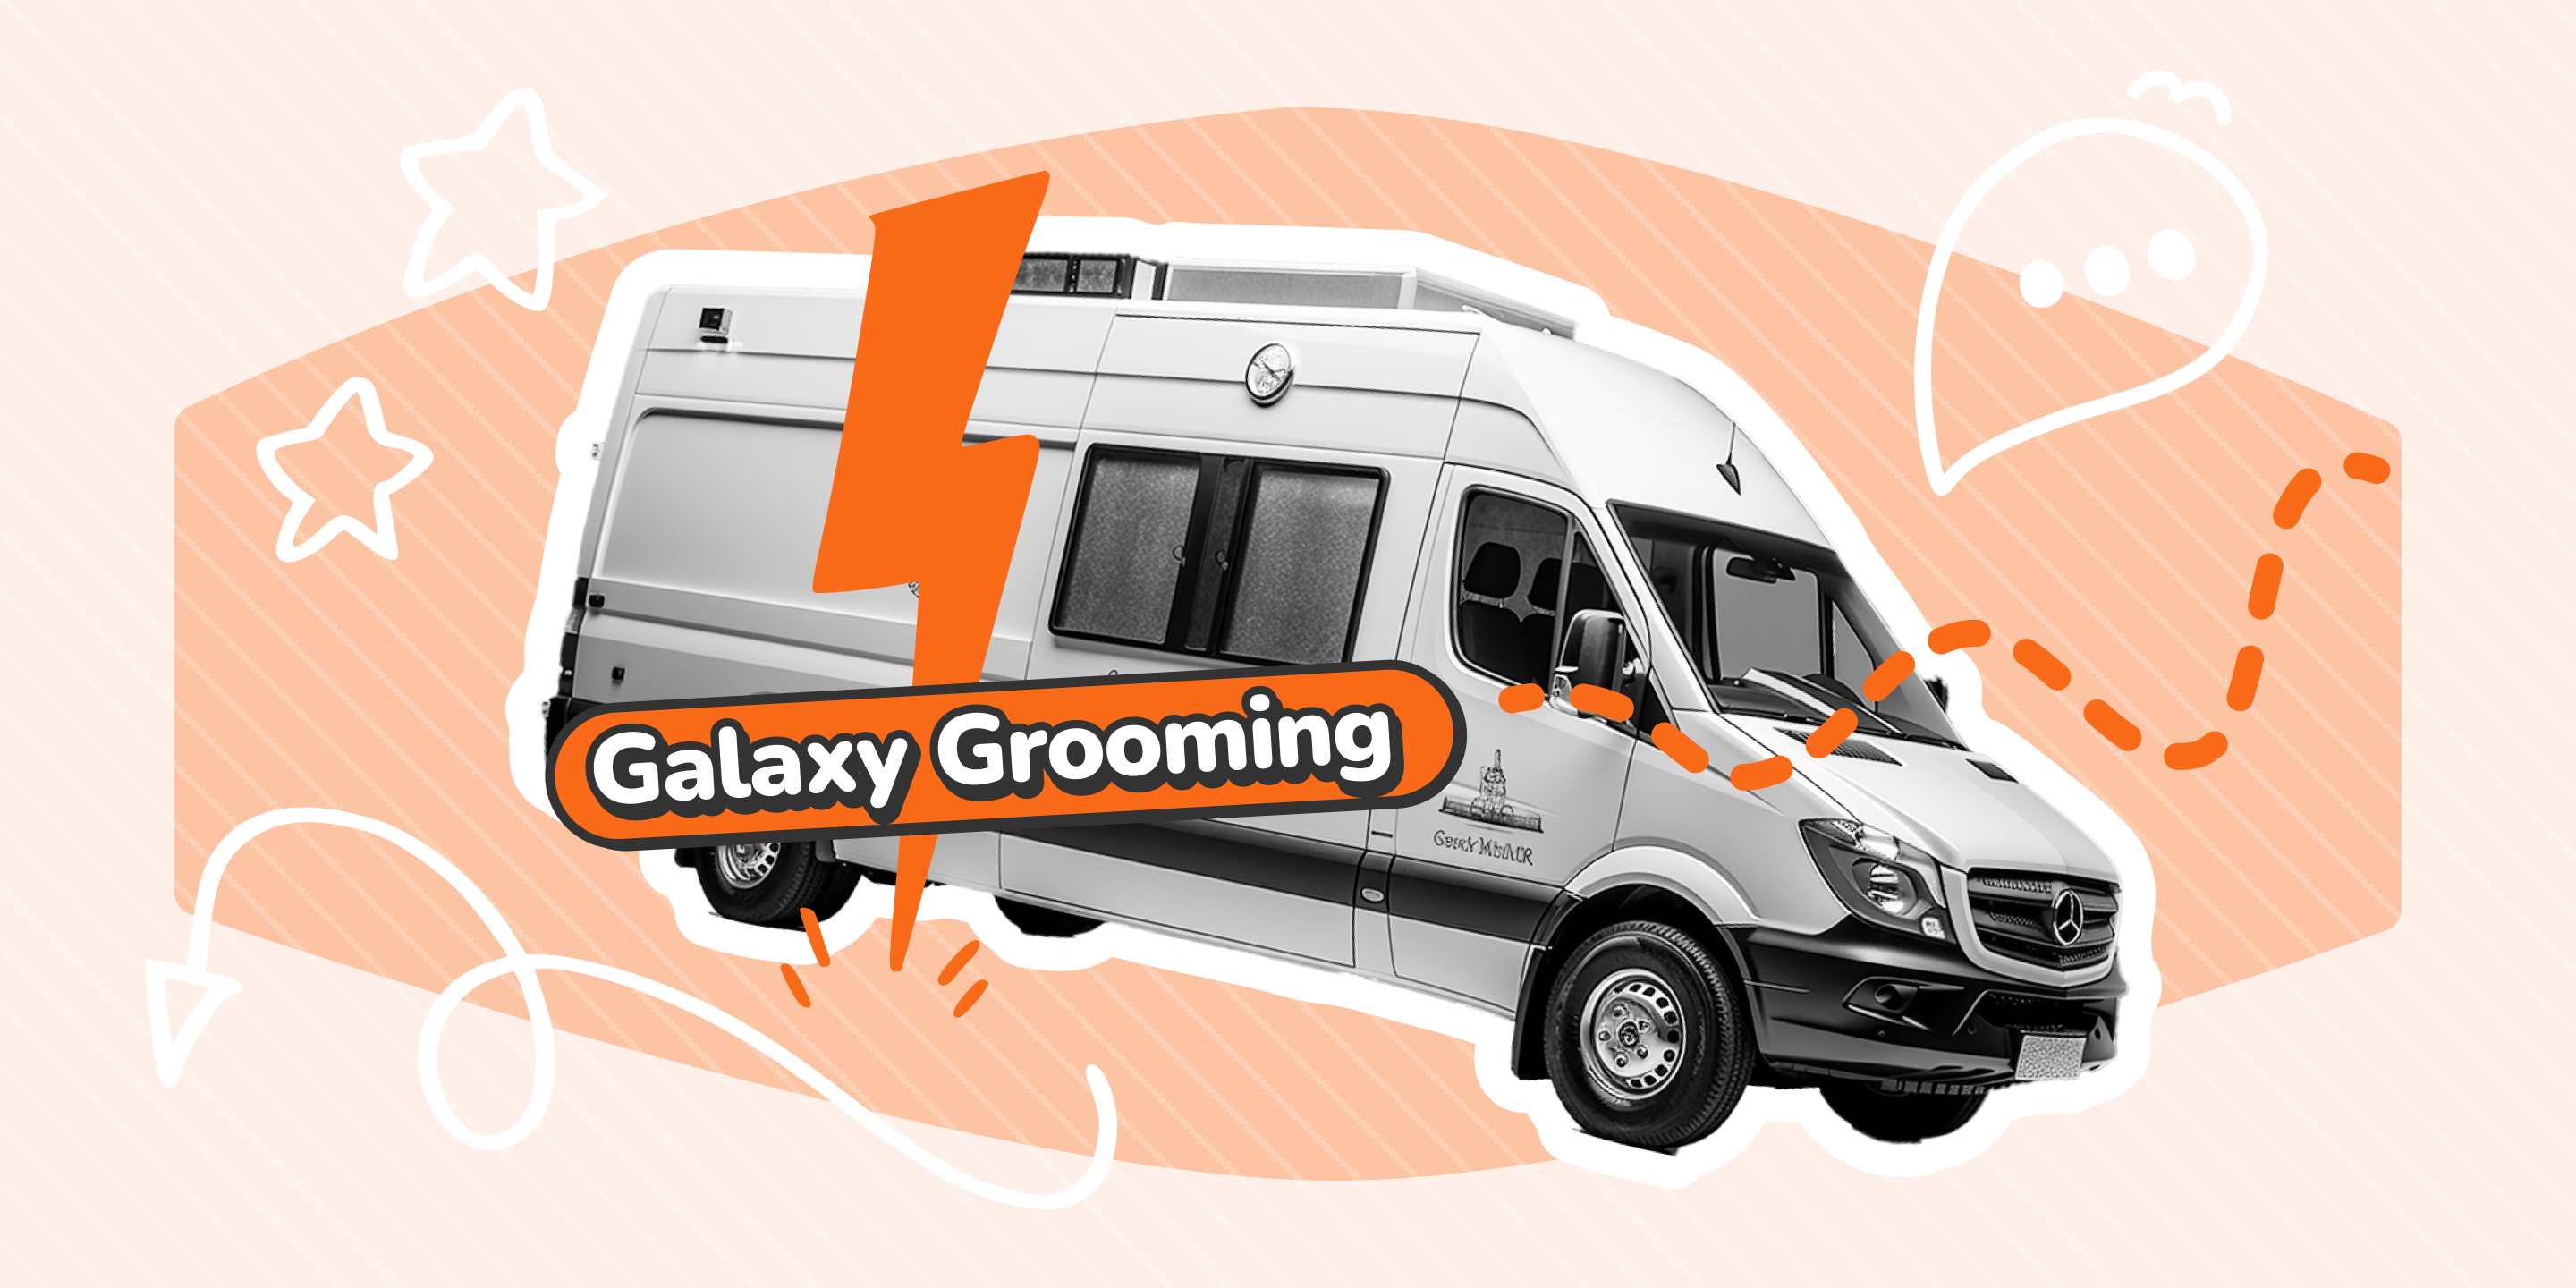 From Fintech to Pet Grooming: Galaxy Grooming’s Path to 500+ Clients in 6 Months